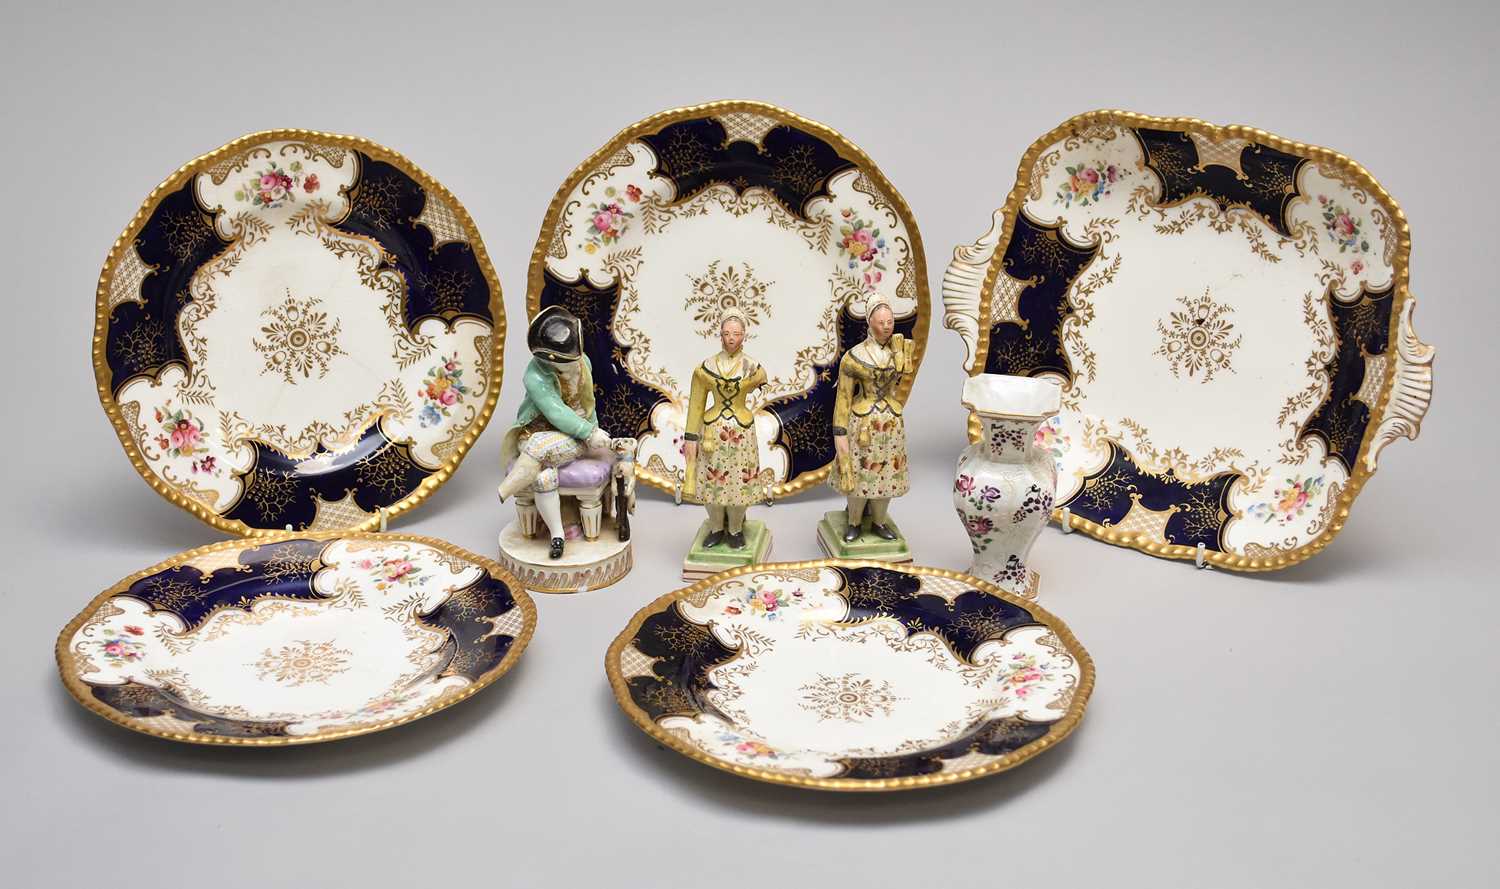 A collection of porcelain, including a Meissen model of a seated boy and Coalport batwing service